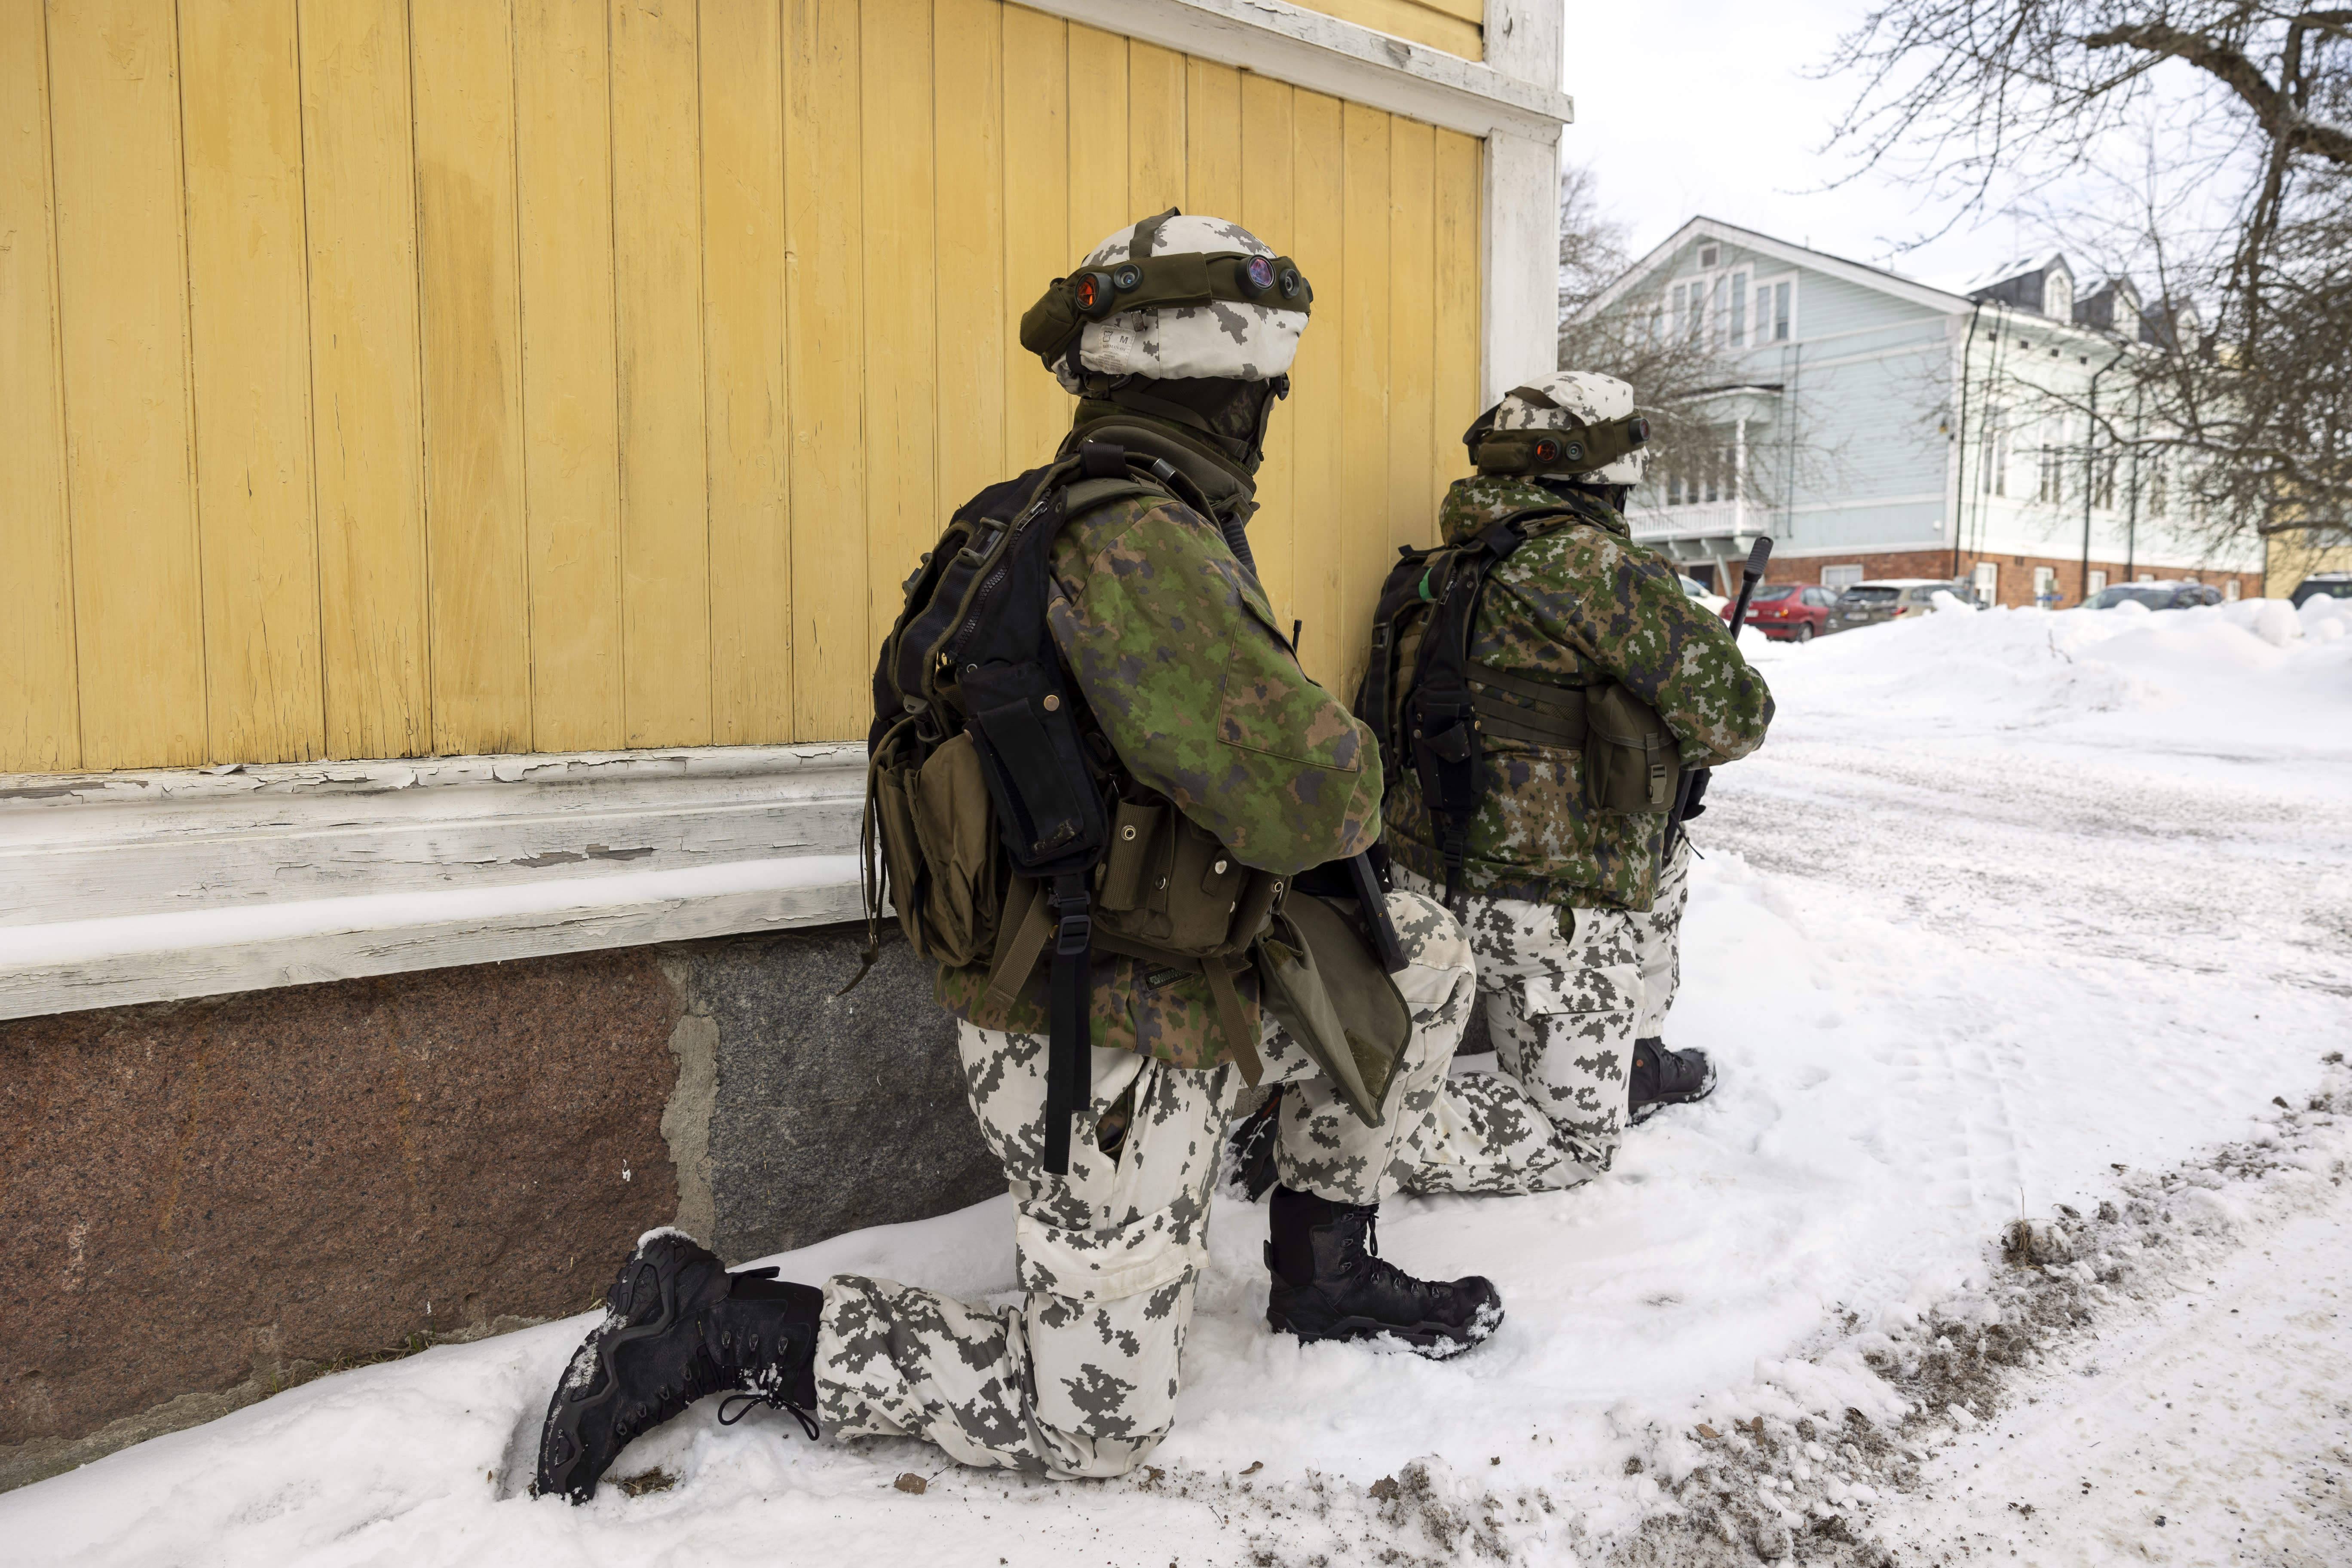 Finland is planning local defense exercises in different parts of the country